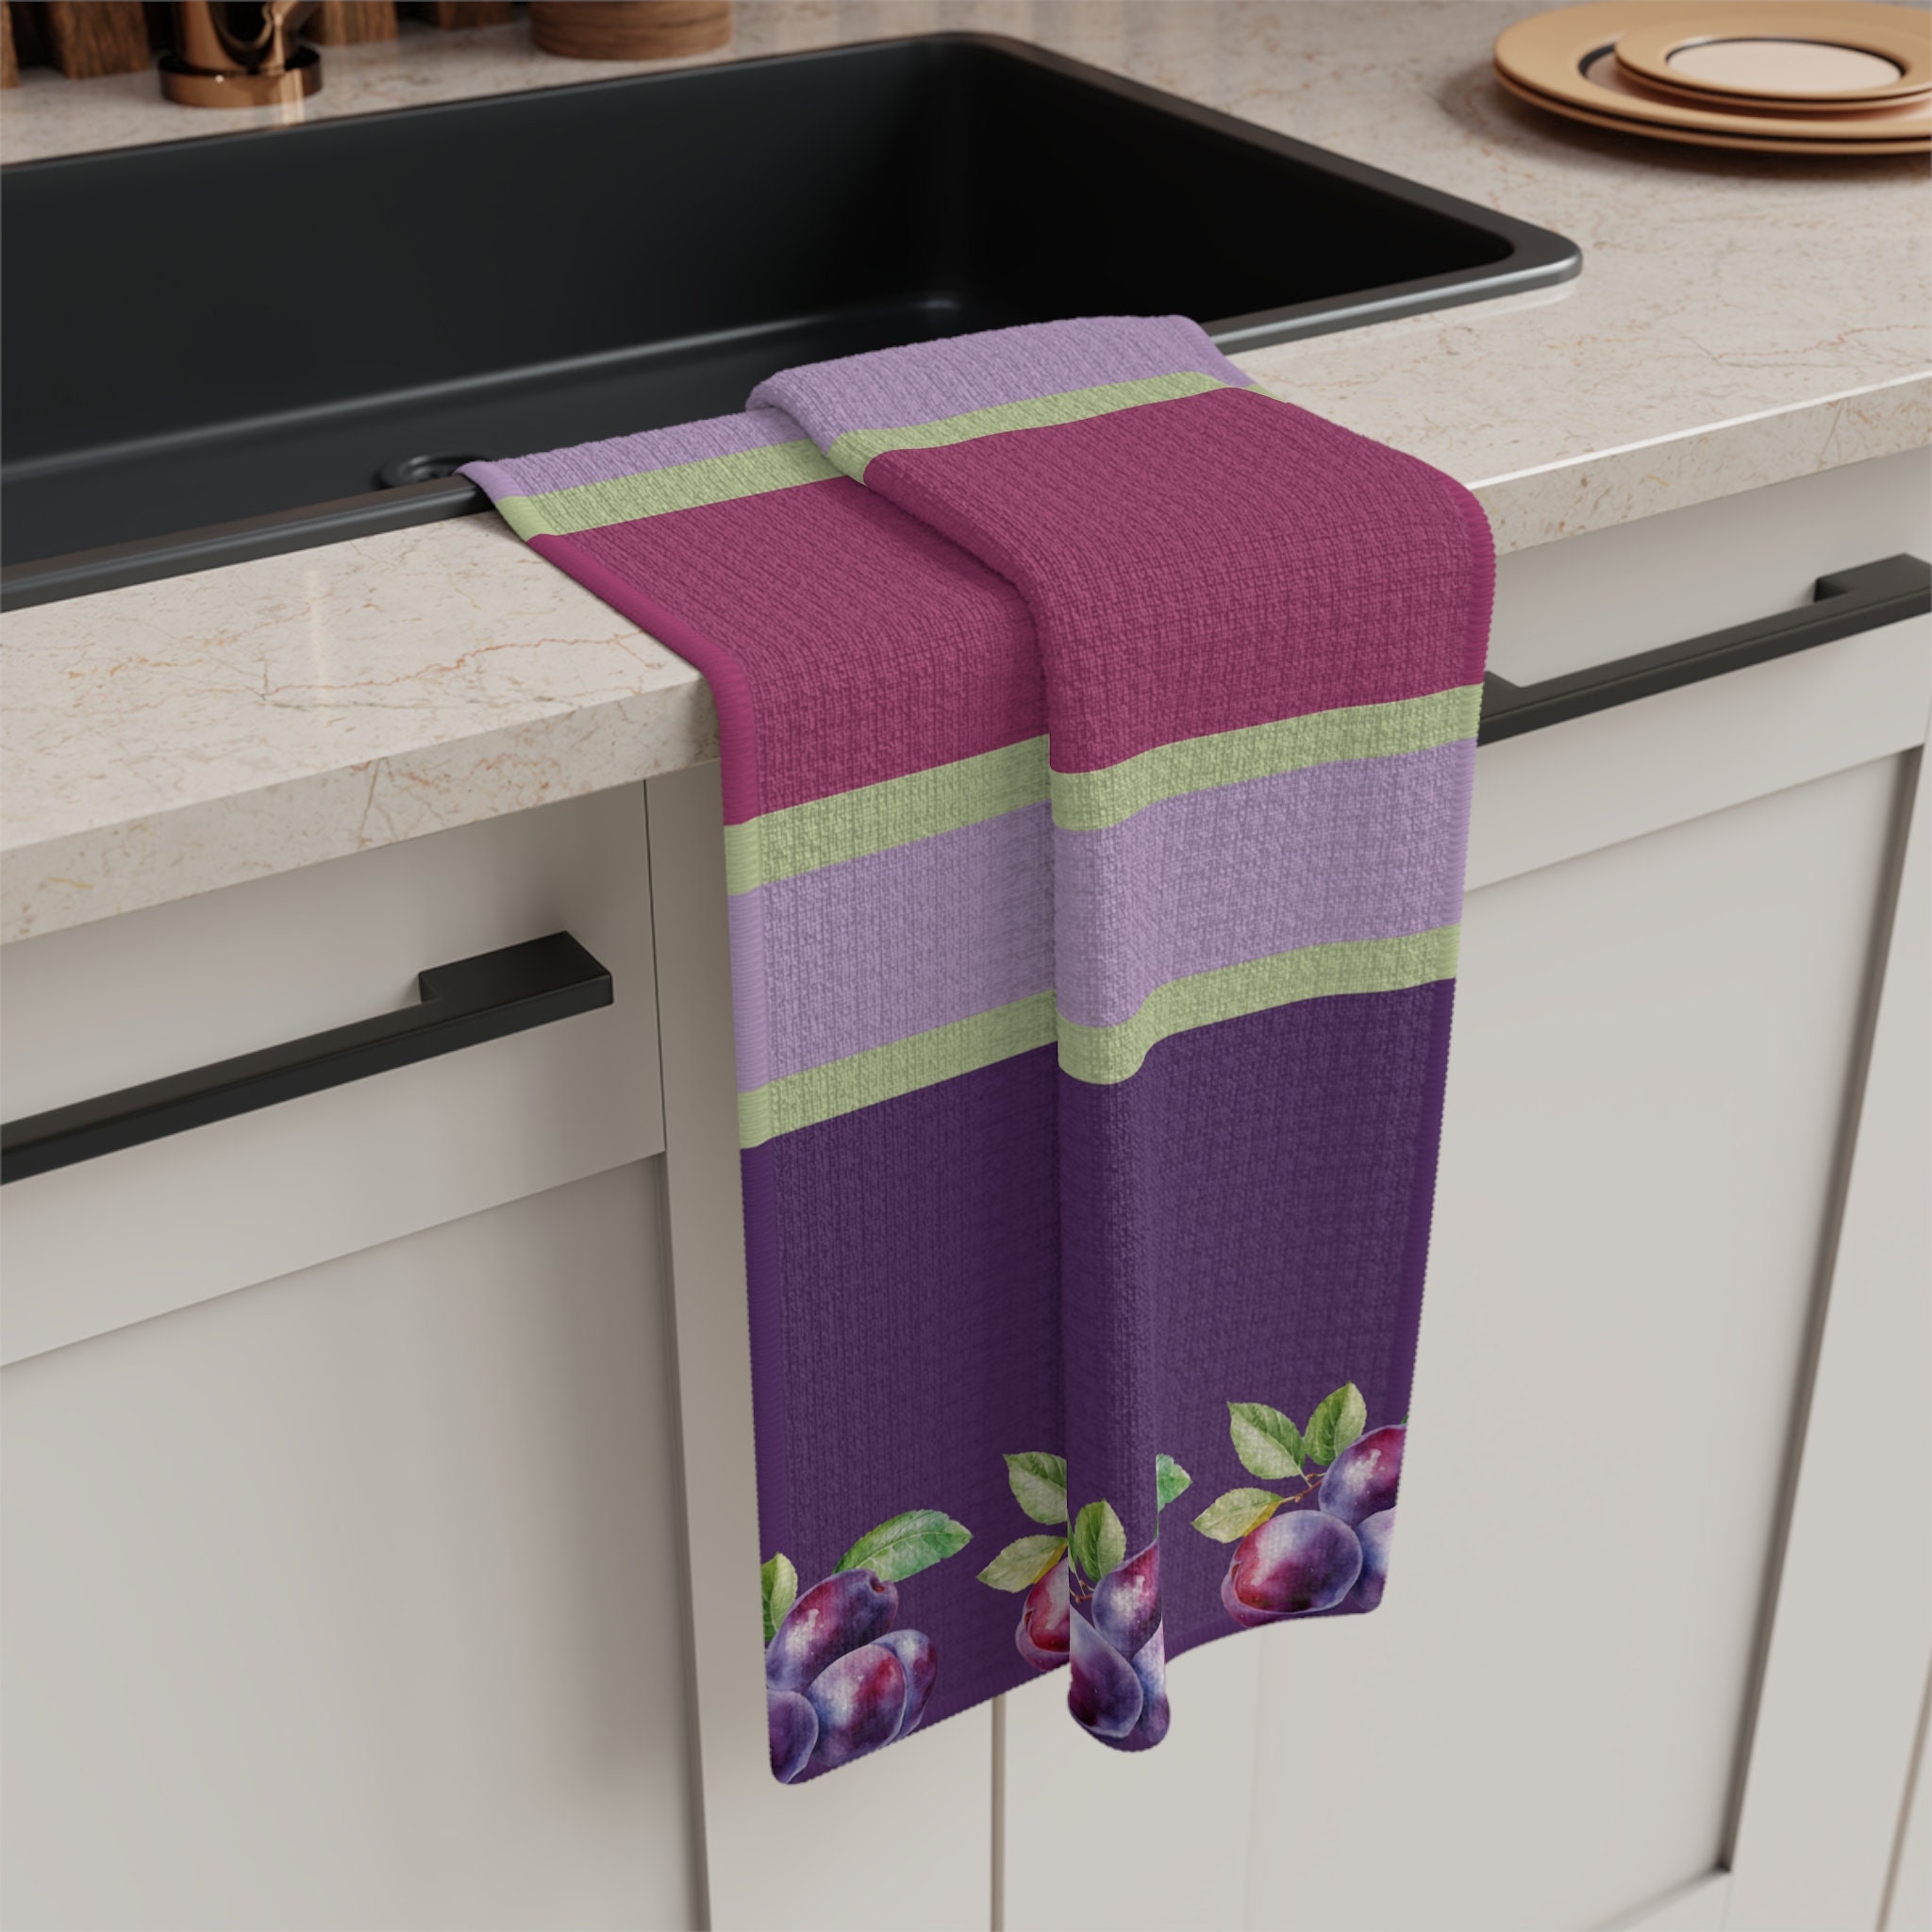 Lavien Home, Dish Towels for Kitchen Lavender Embroidery Super Absorbent  and Sof